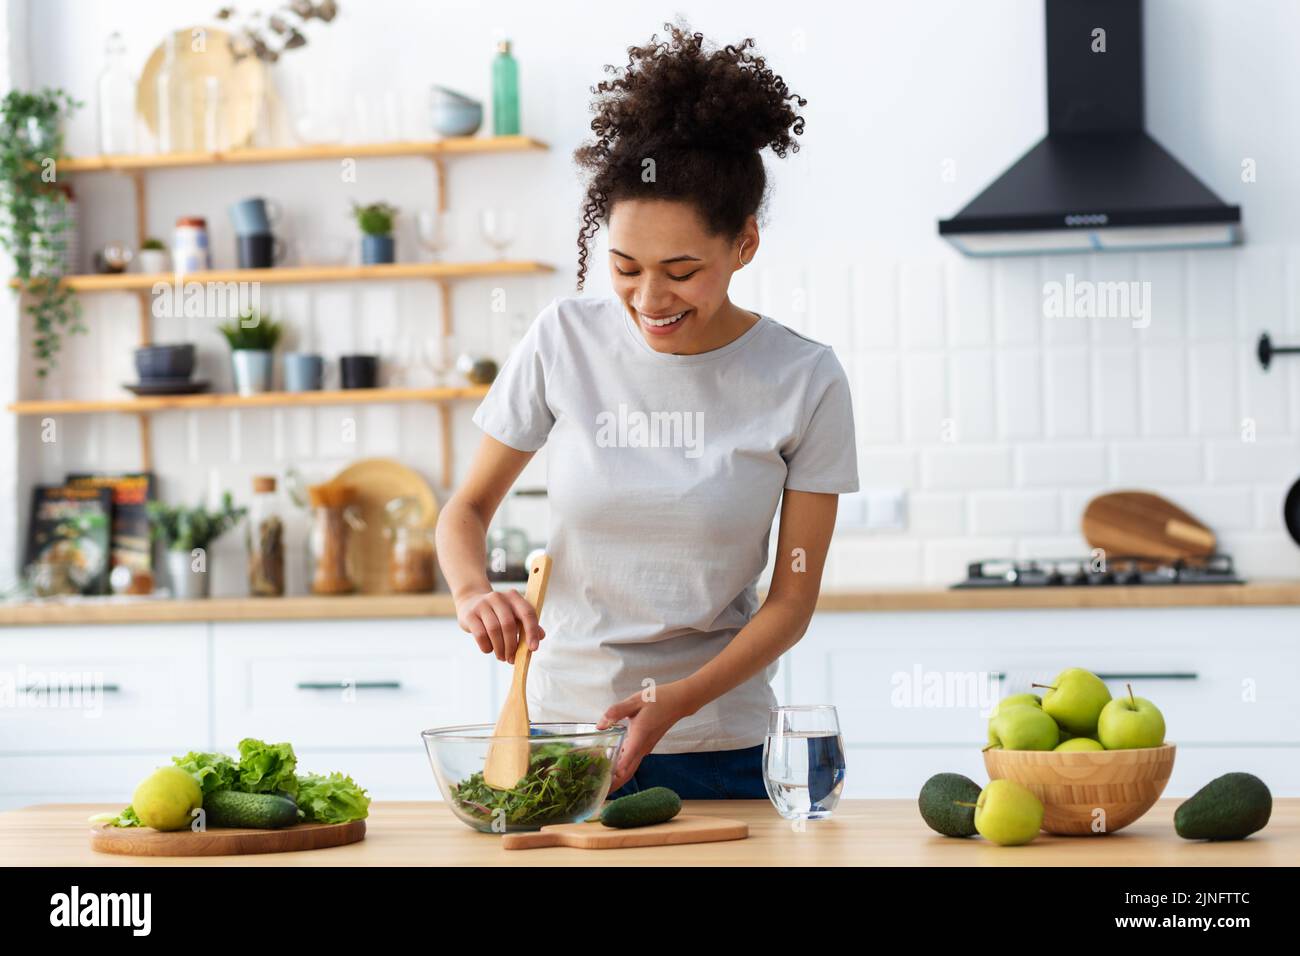 Healthy diet eating African American young female preparing salad in home kitchen Stock Photo